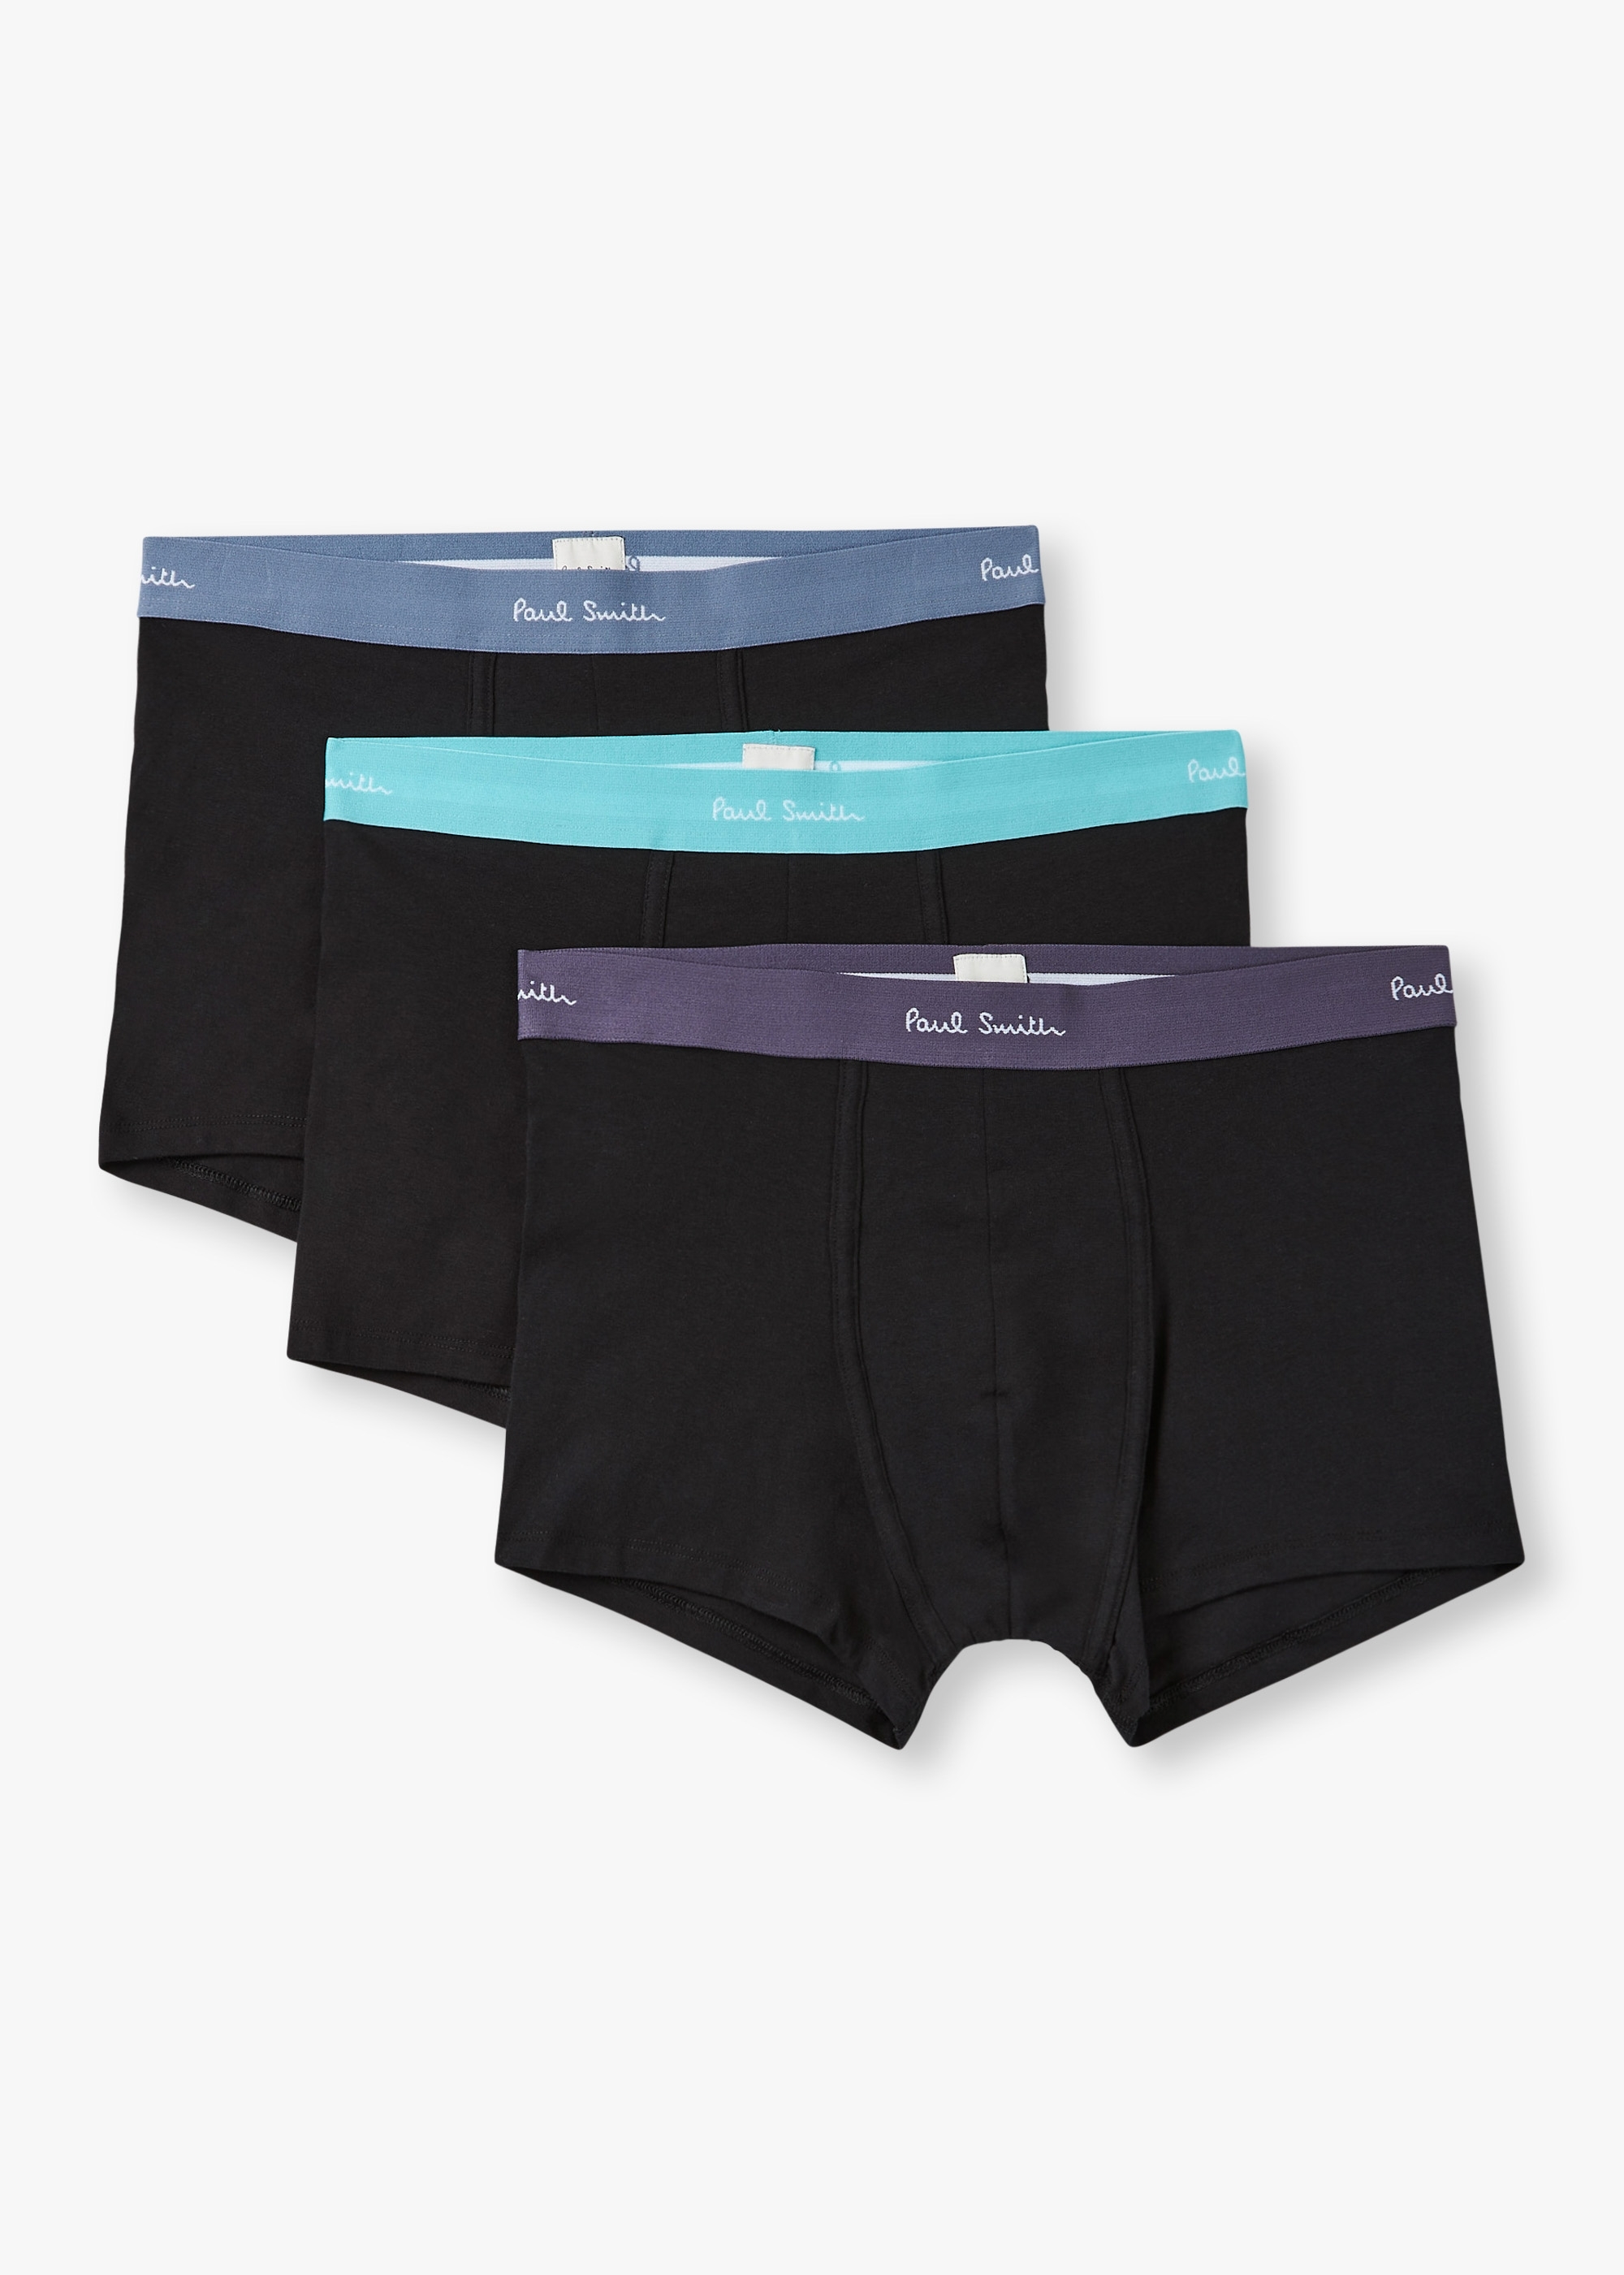 Paul Smith Mens 3 Pack Black Contrast Waistband Trunk In Black